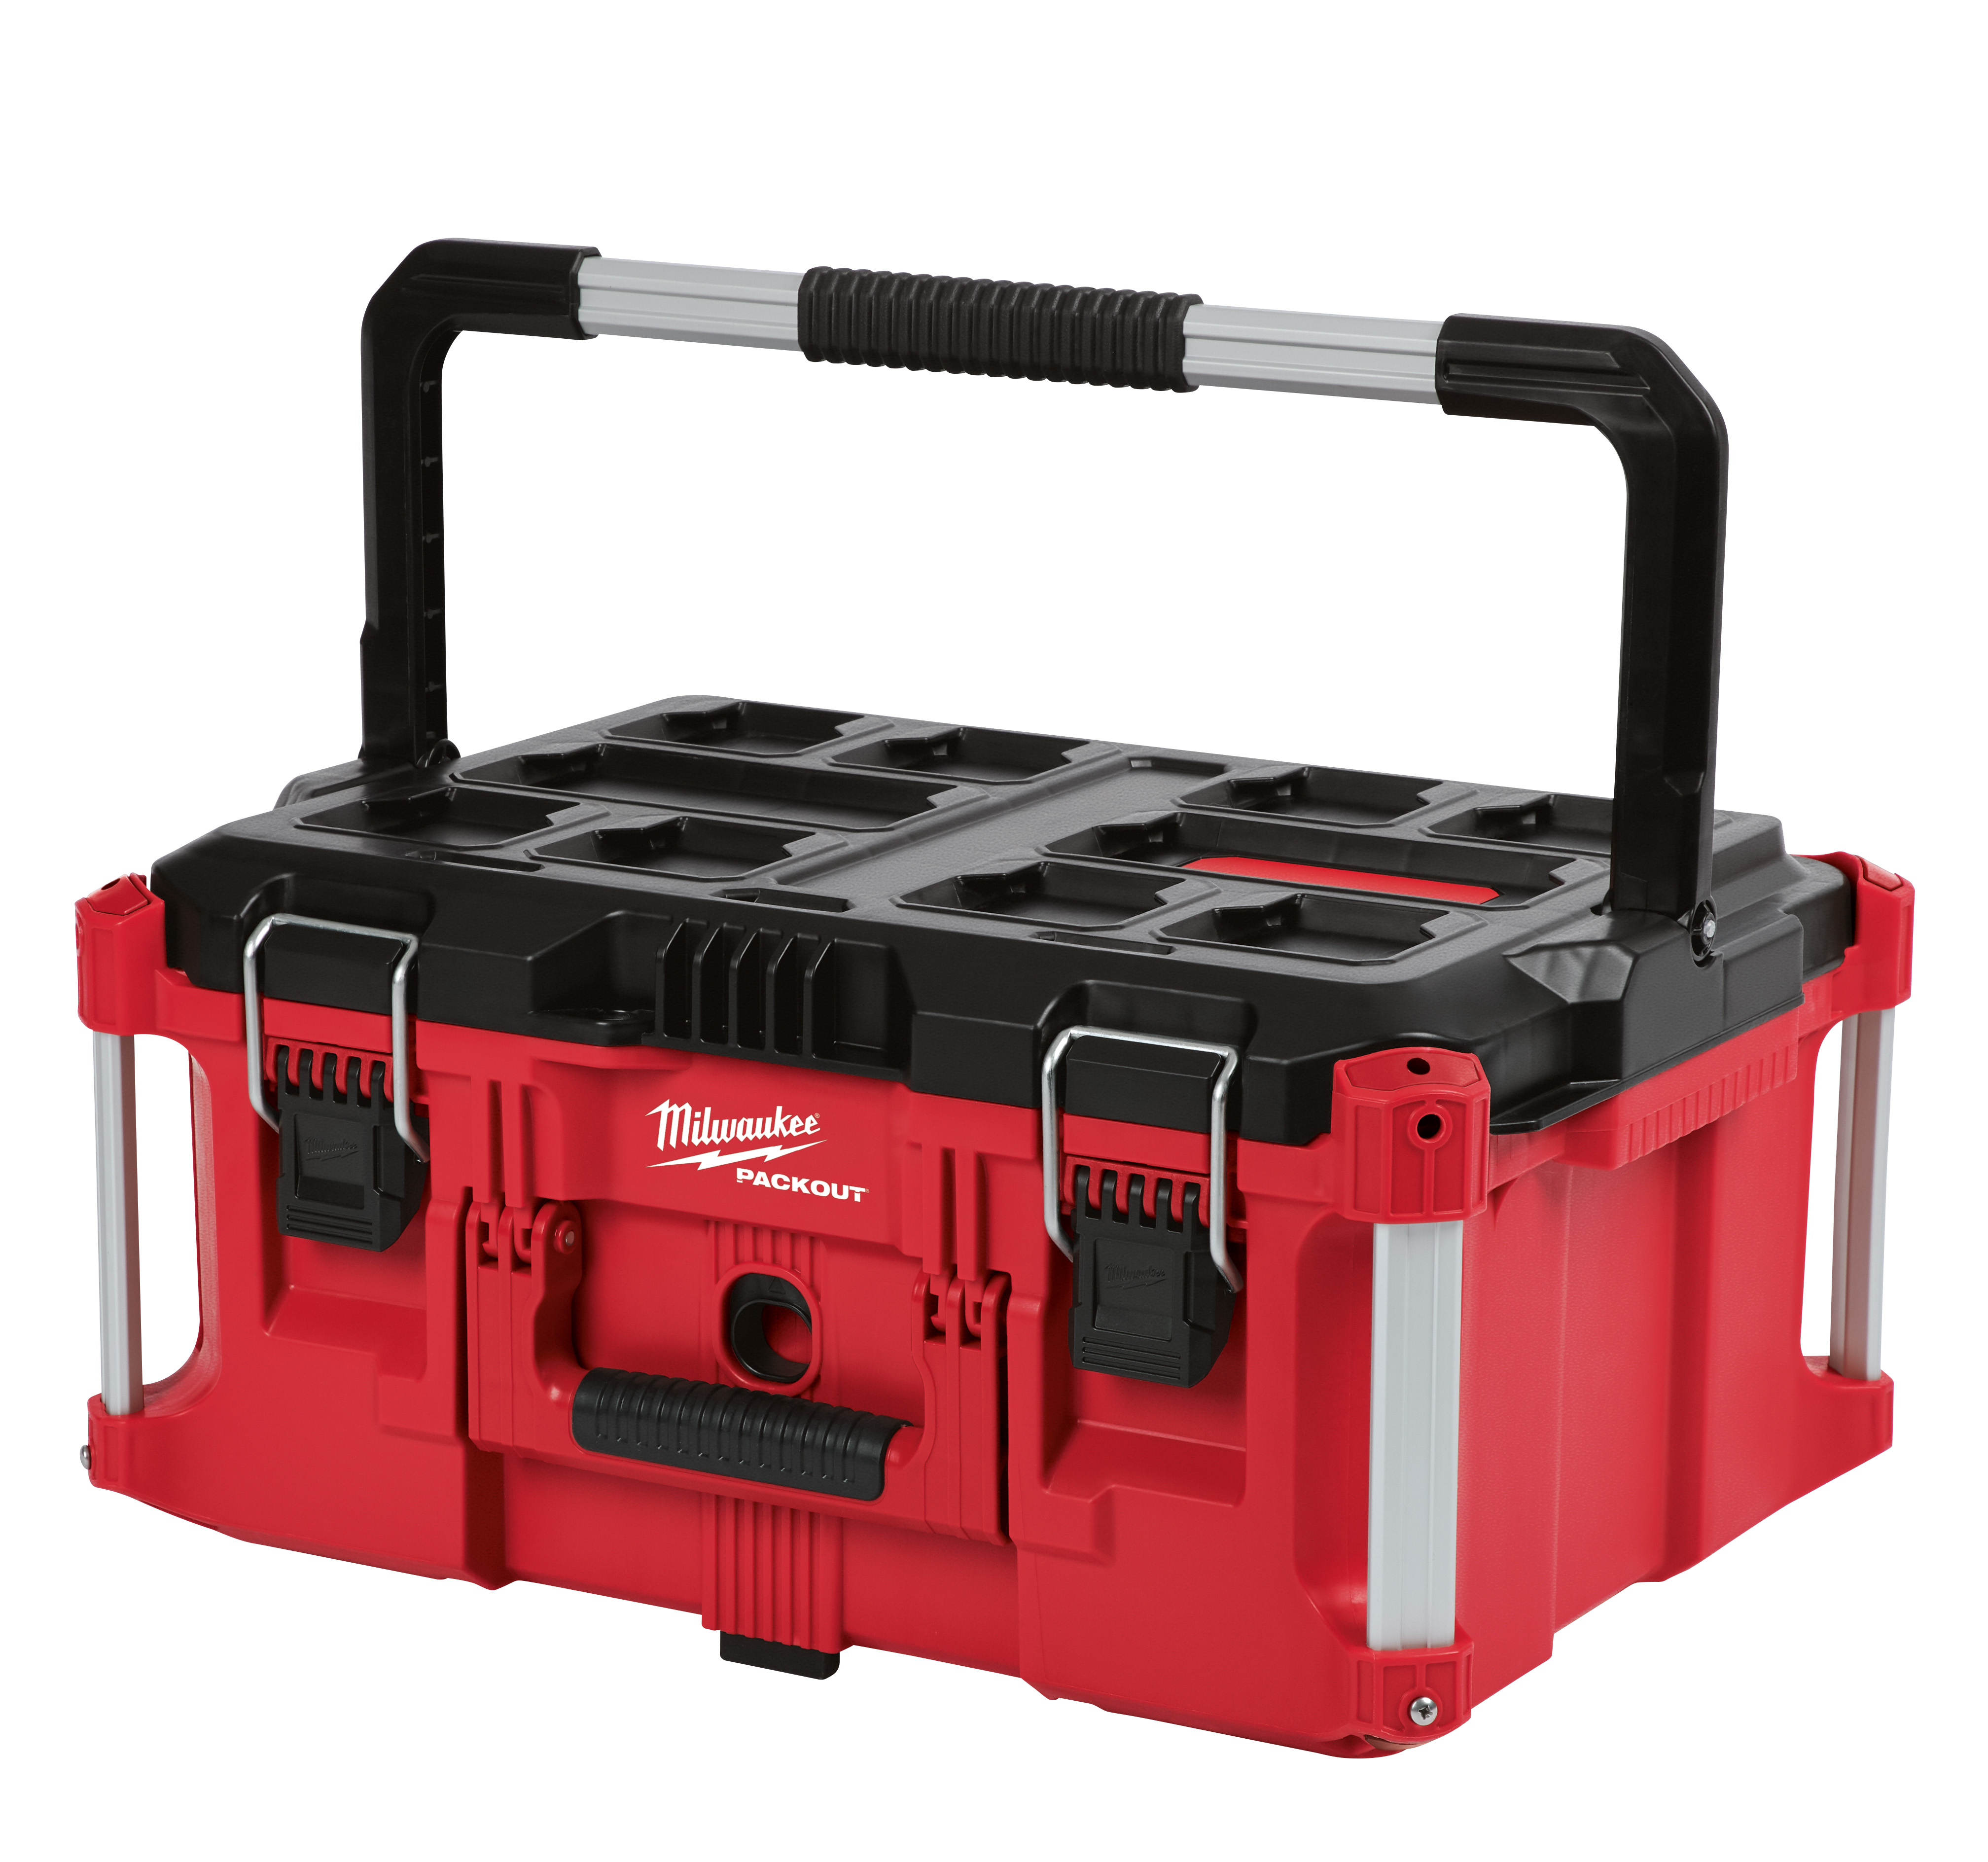 Part of the industry’s most versatile and most durable modular storage system, the Milwaukee PACKOUT™ large tool box is constructed with impact resistant polymers and metal reinforced corners to provide up to 100 lbs of weight capacity and ultimate durability in harsh jobsite conditions. Featuring an IP65 rated weather seal to keep out rain and jobsite debris, and a metal reinforced top handle, the Milwaukee PACKOUT™ large tool box is fully compatible with all Milwaukee PACKOUT™ modular storage products.